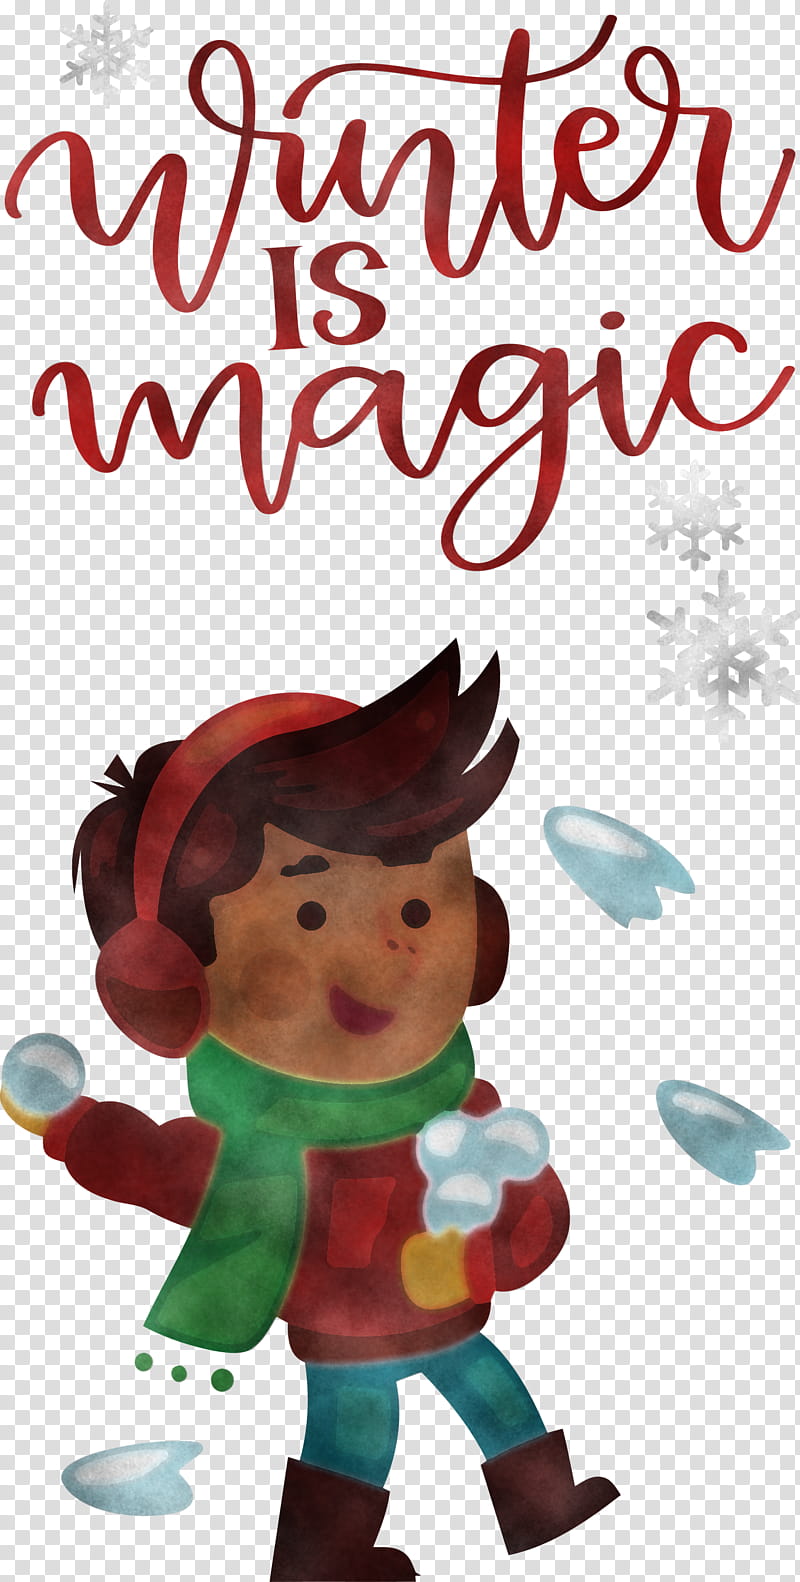 Winter Is Magic Hello Winter Winter, Winter
, Christmas Day, Cartoon, Drawing, Santa Claus, Christmas Ornament transparent background PNG clipart